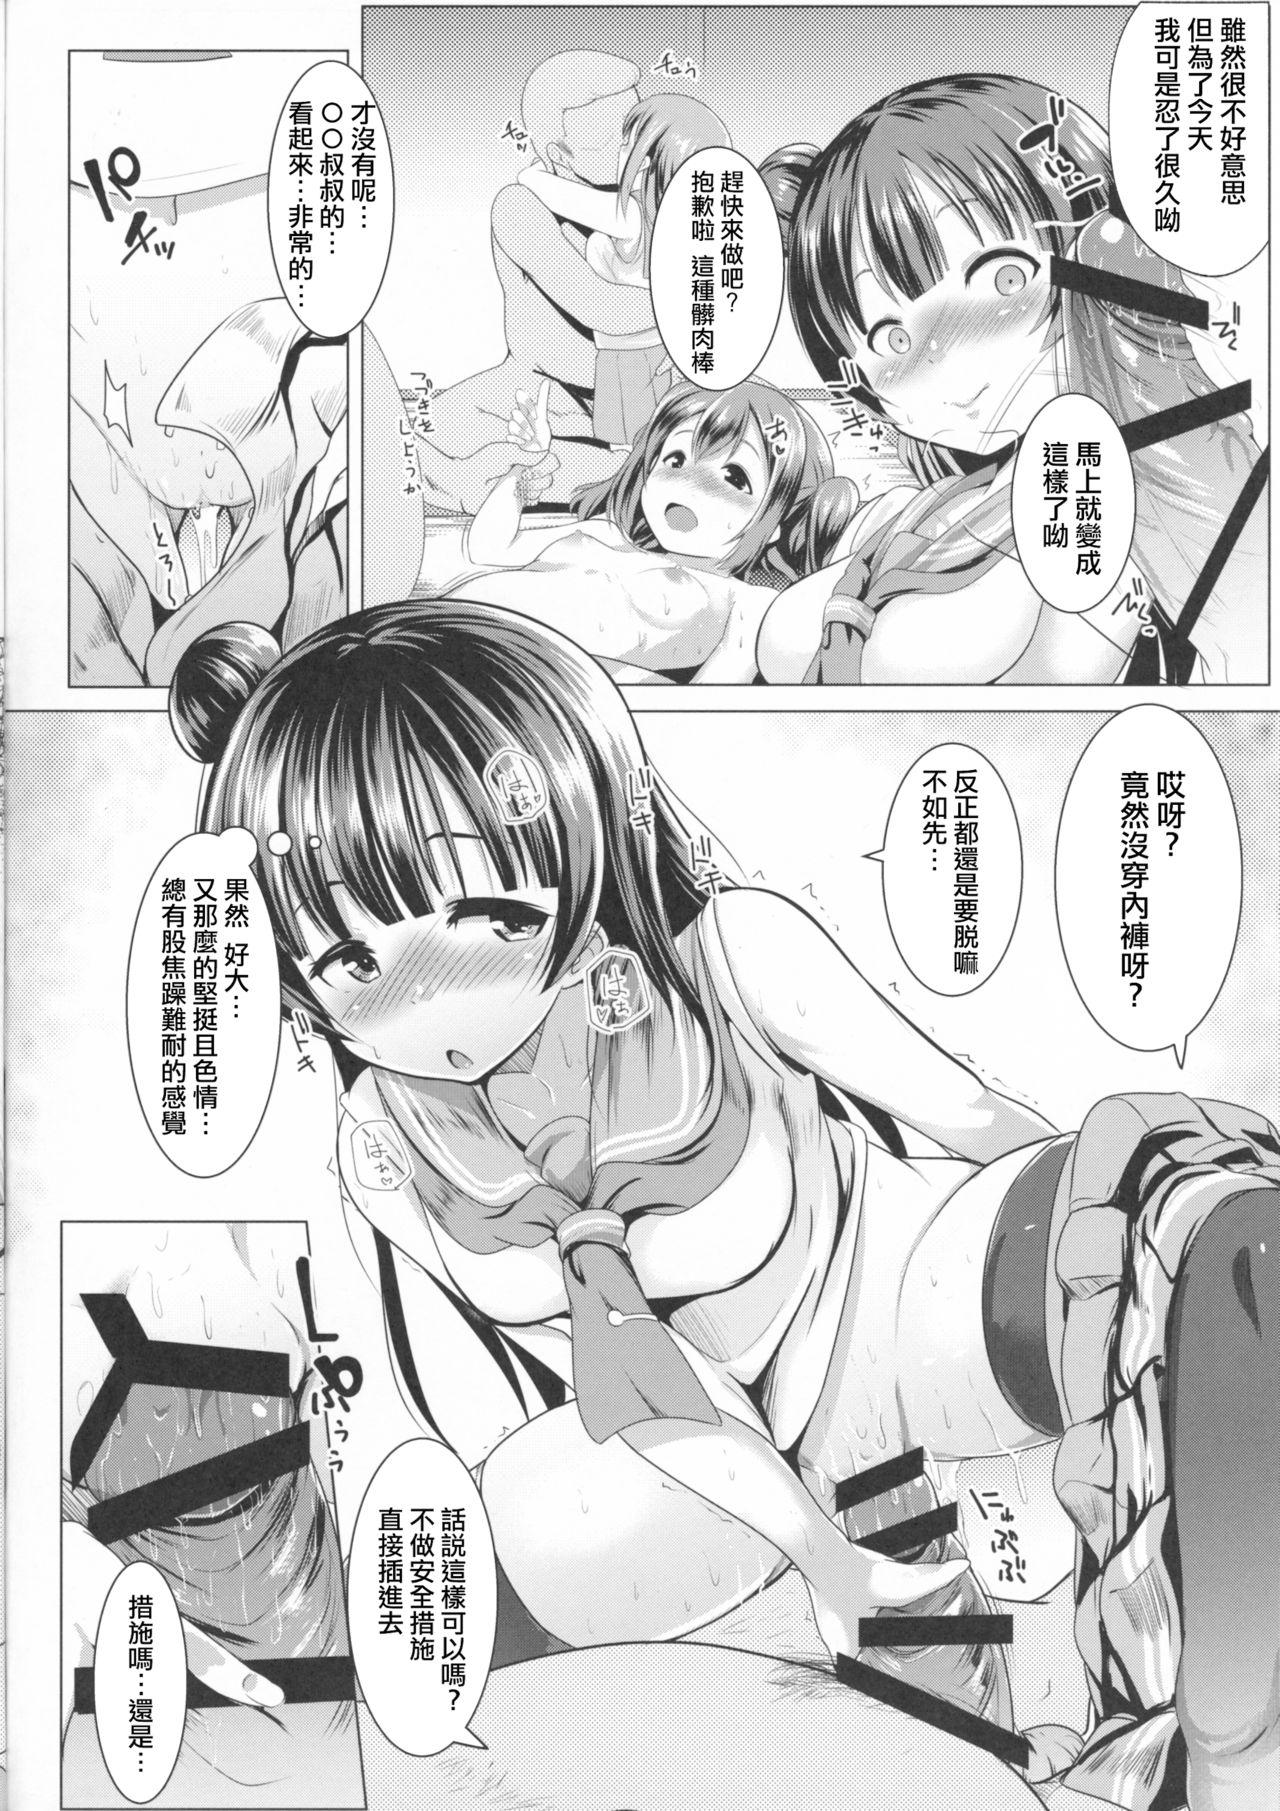 Hidden SUMMER PROMISCUITY with Yoshimaruby - Love live sunshine Point Of View - Page 7